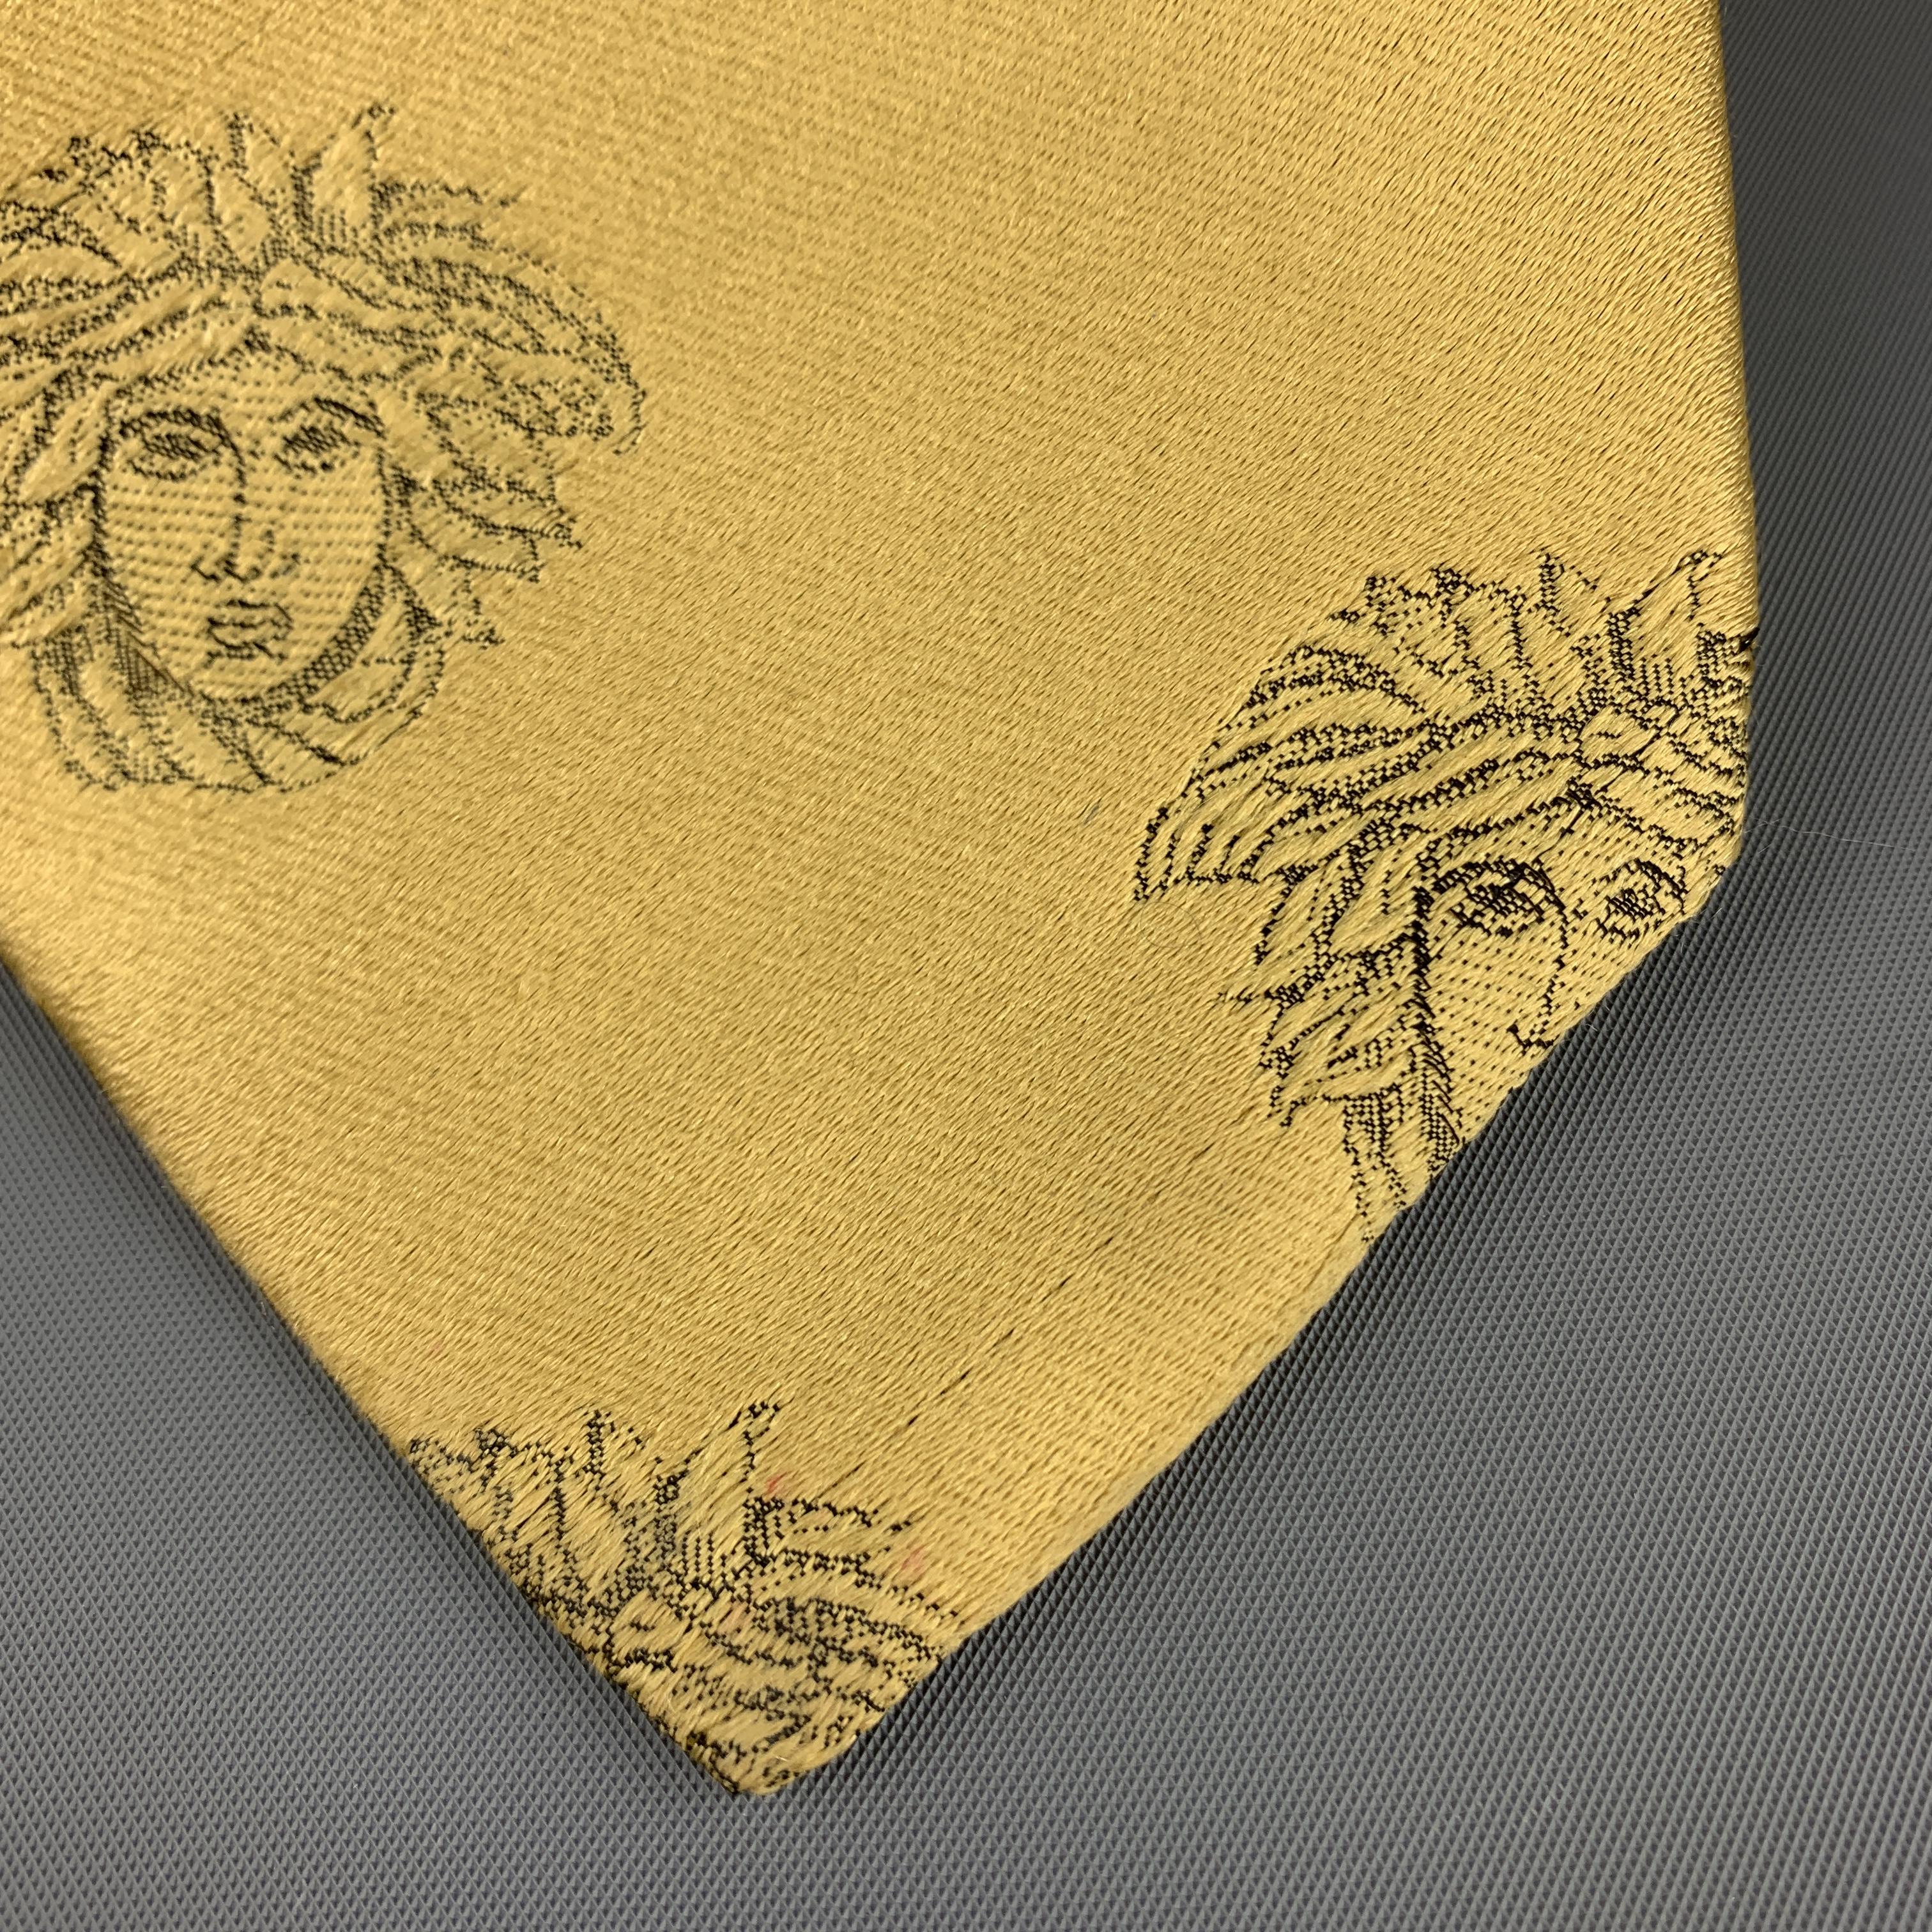 Vintage GIANNI VERSACE tie comes in gold silk with all over Medusa head graphic print. Imperfections shown in detail shot. As-is. Made in Italy.
 
Good Pre-Owned Condition.
 
Width: 3.5 in.